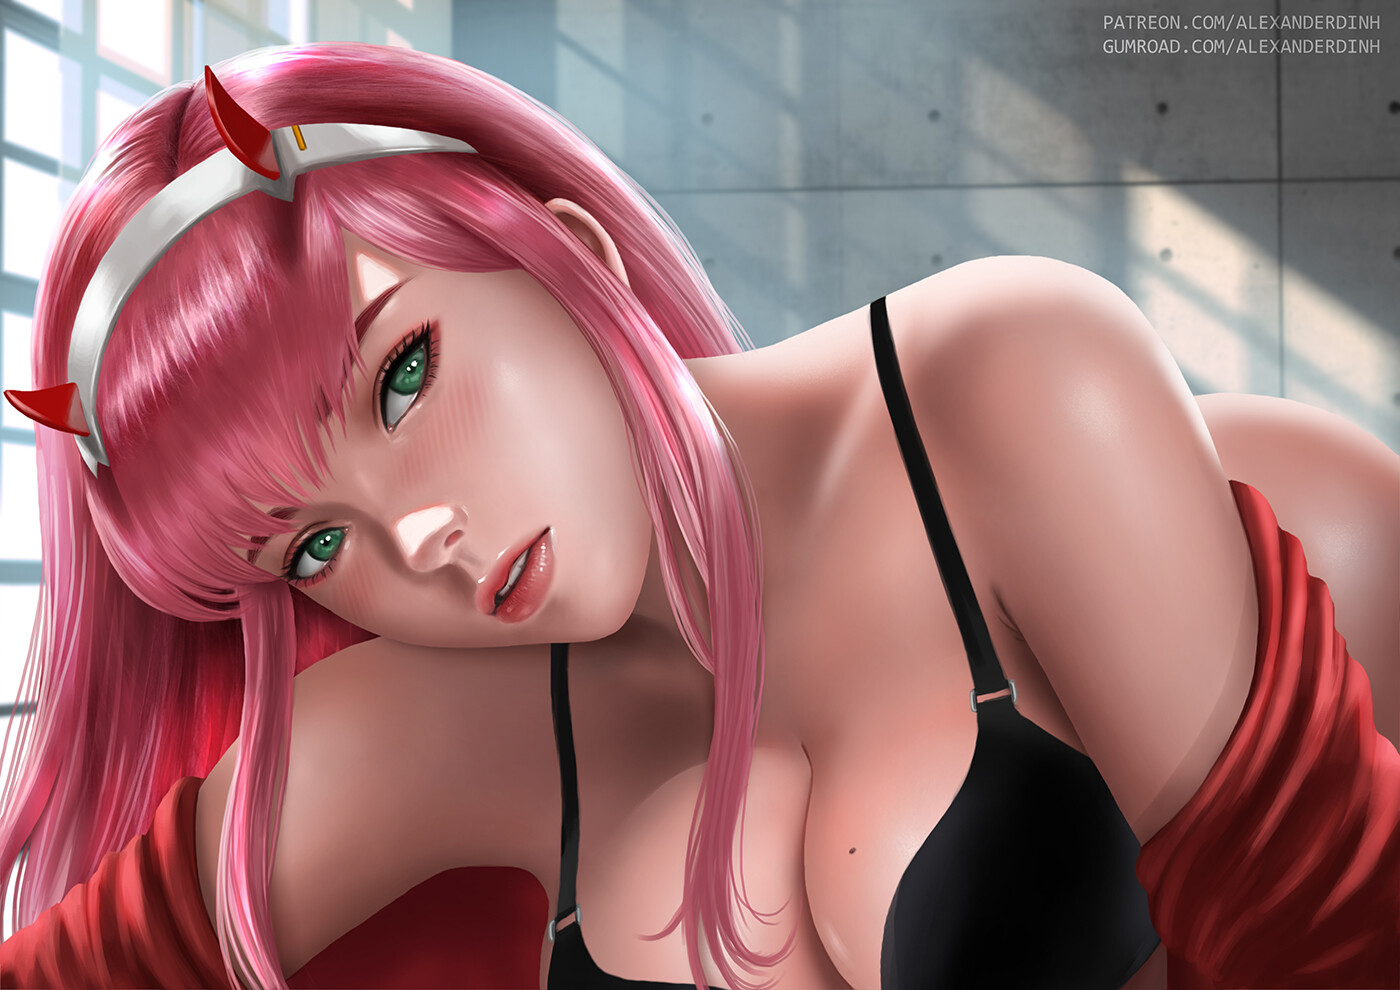 Support me to get more hot scenes of Zero Two: https://www.patreon.com/alex...